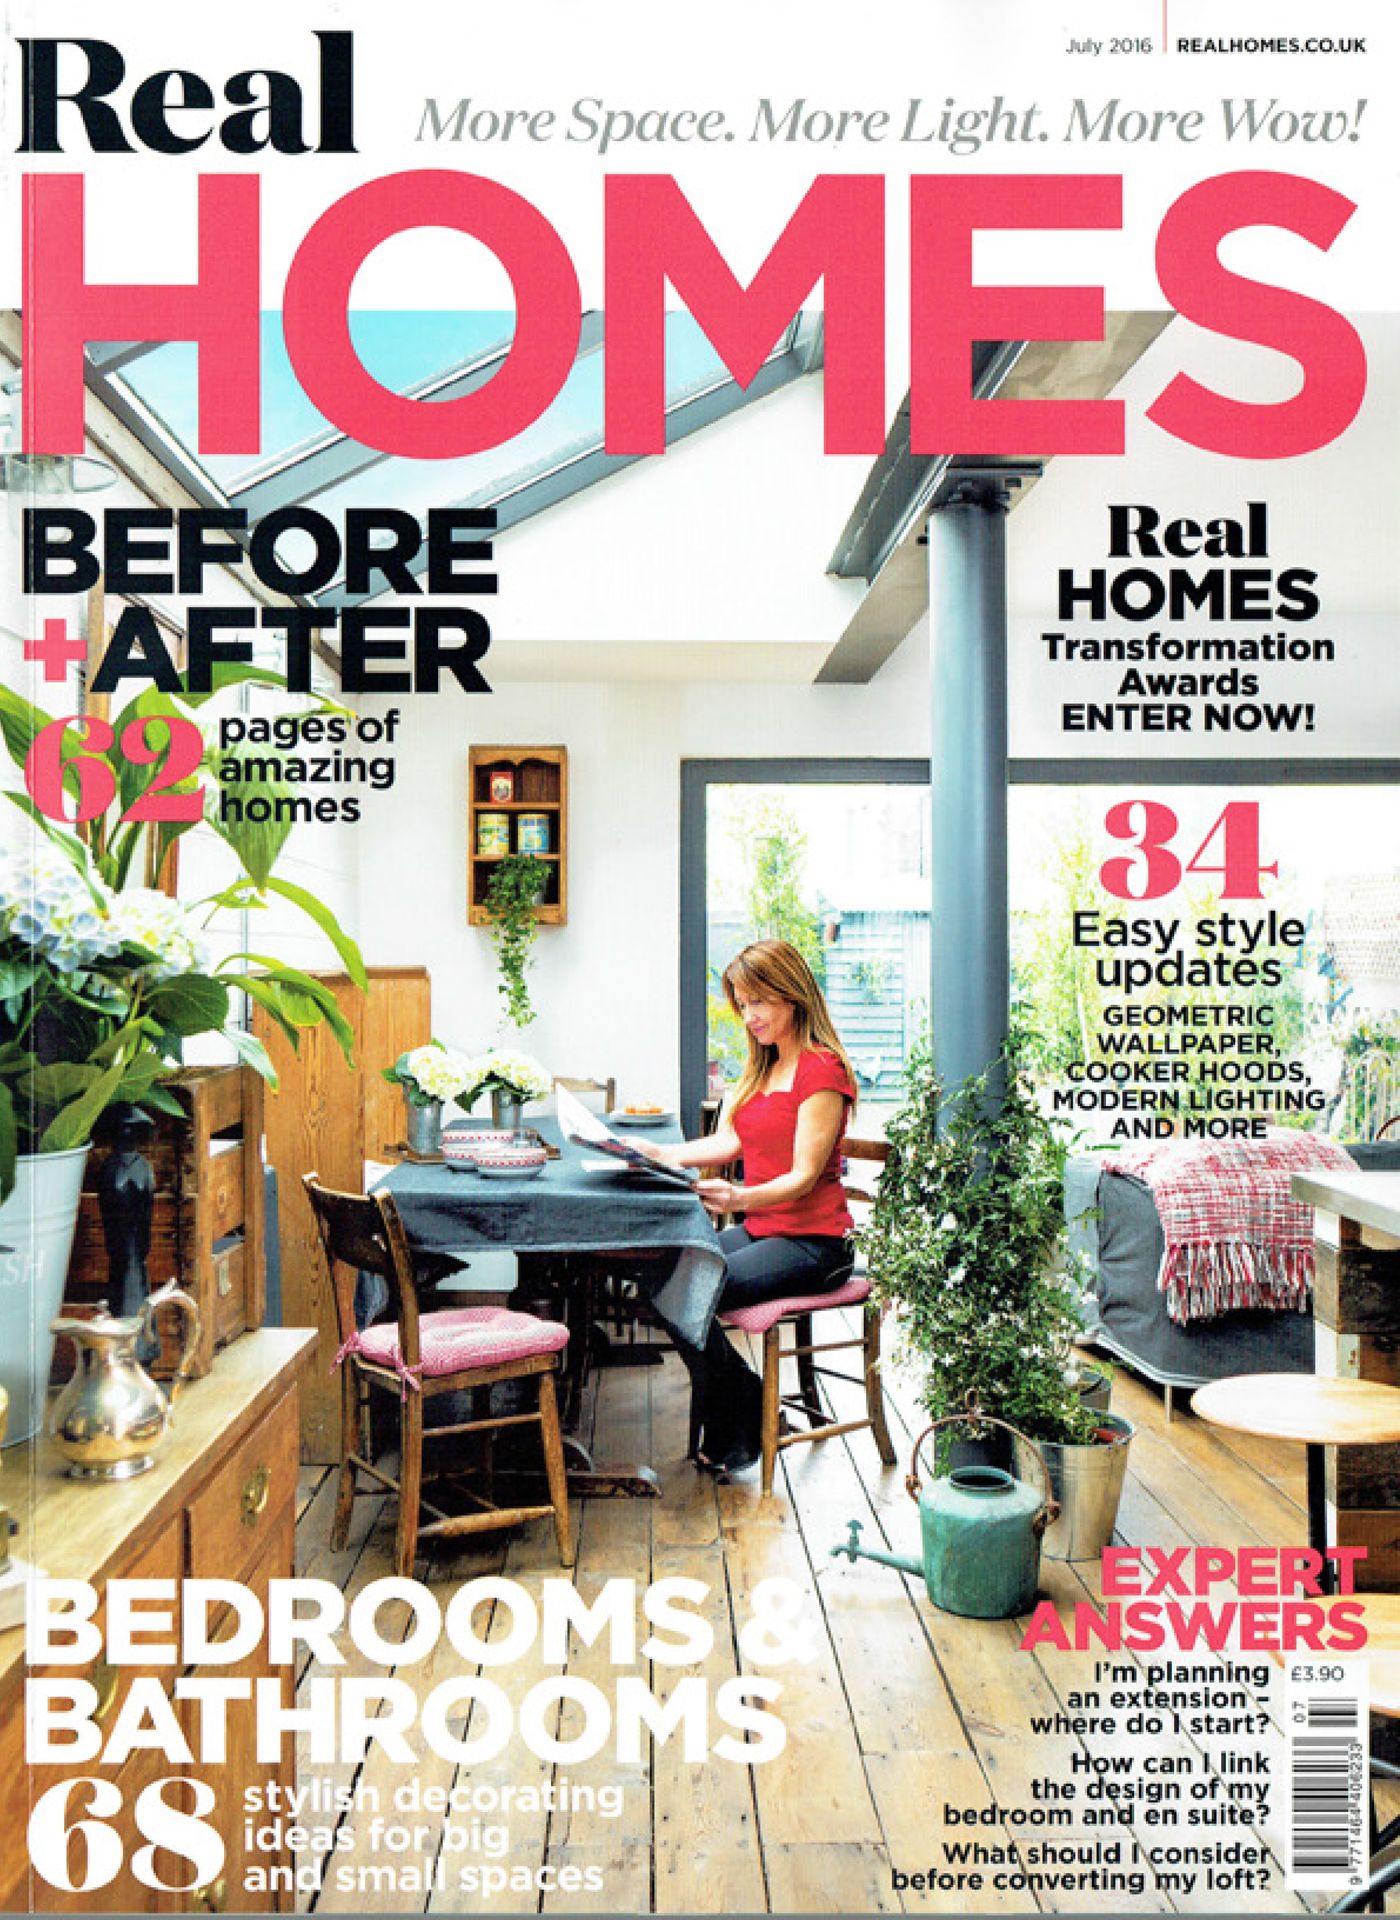 Build Team Featured in Real Homes